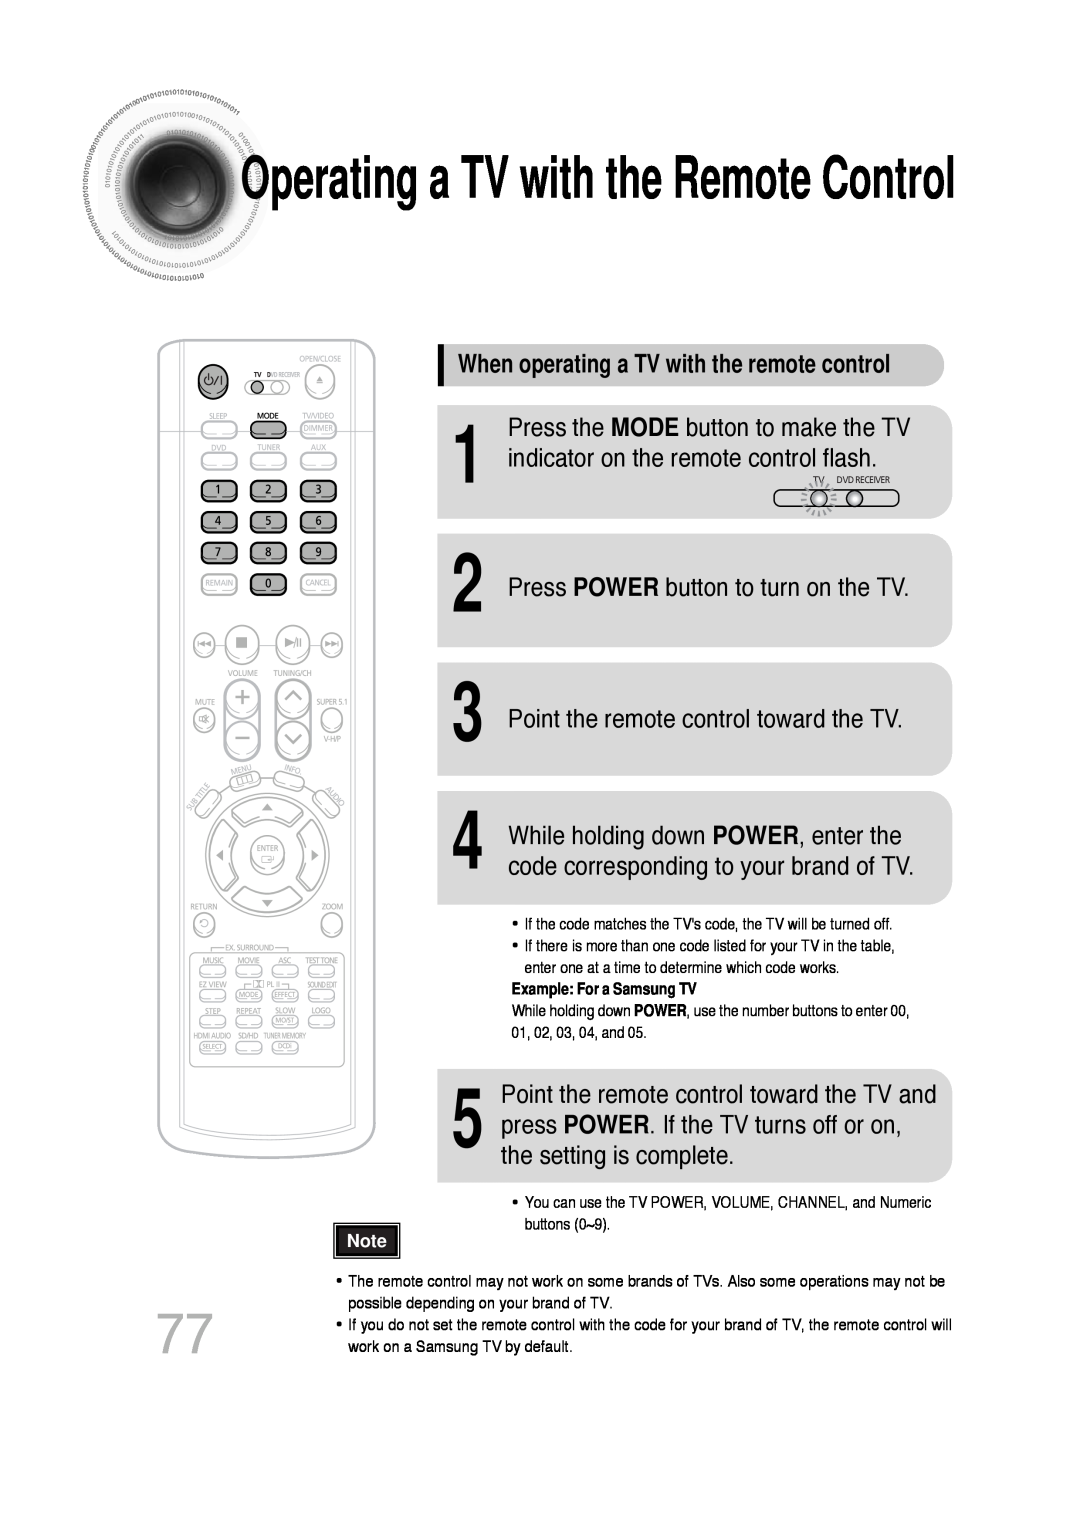 Samsung 20060814151350437, SDSM-EX manual Operatinga TV with the Remote Control, Point the remote control toward the TV and 